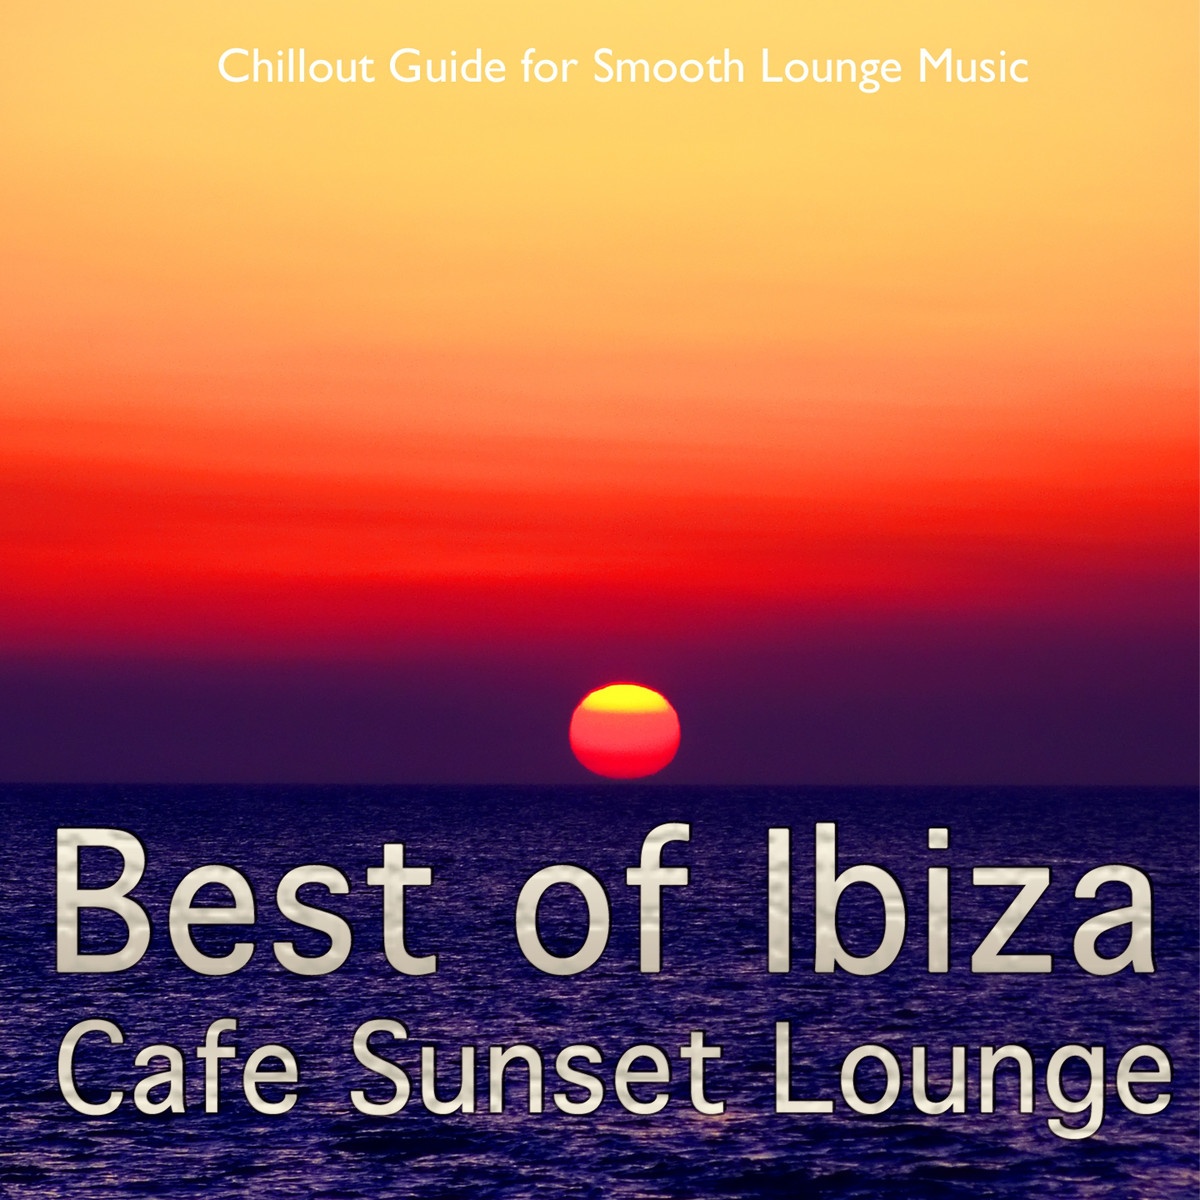 Sitting On an Island - Sunset to Sunrise Chillout Mix